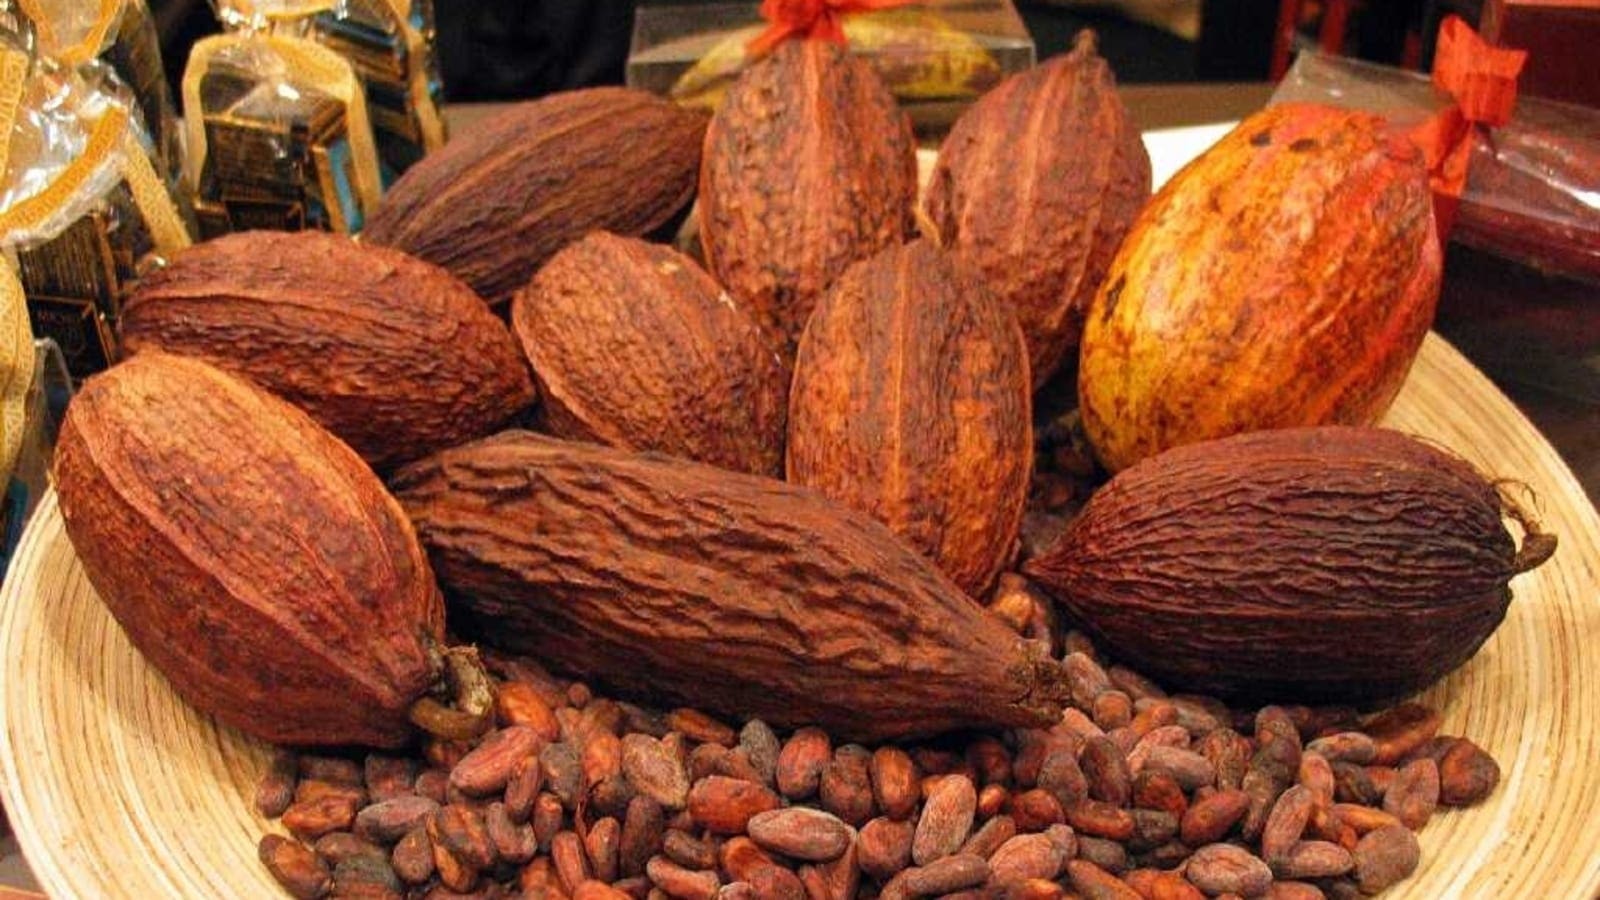 Nigeria state unveils plan to boost Cocoa Industry with three processing hubs 